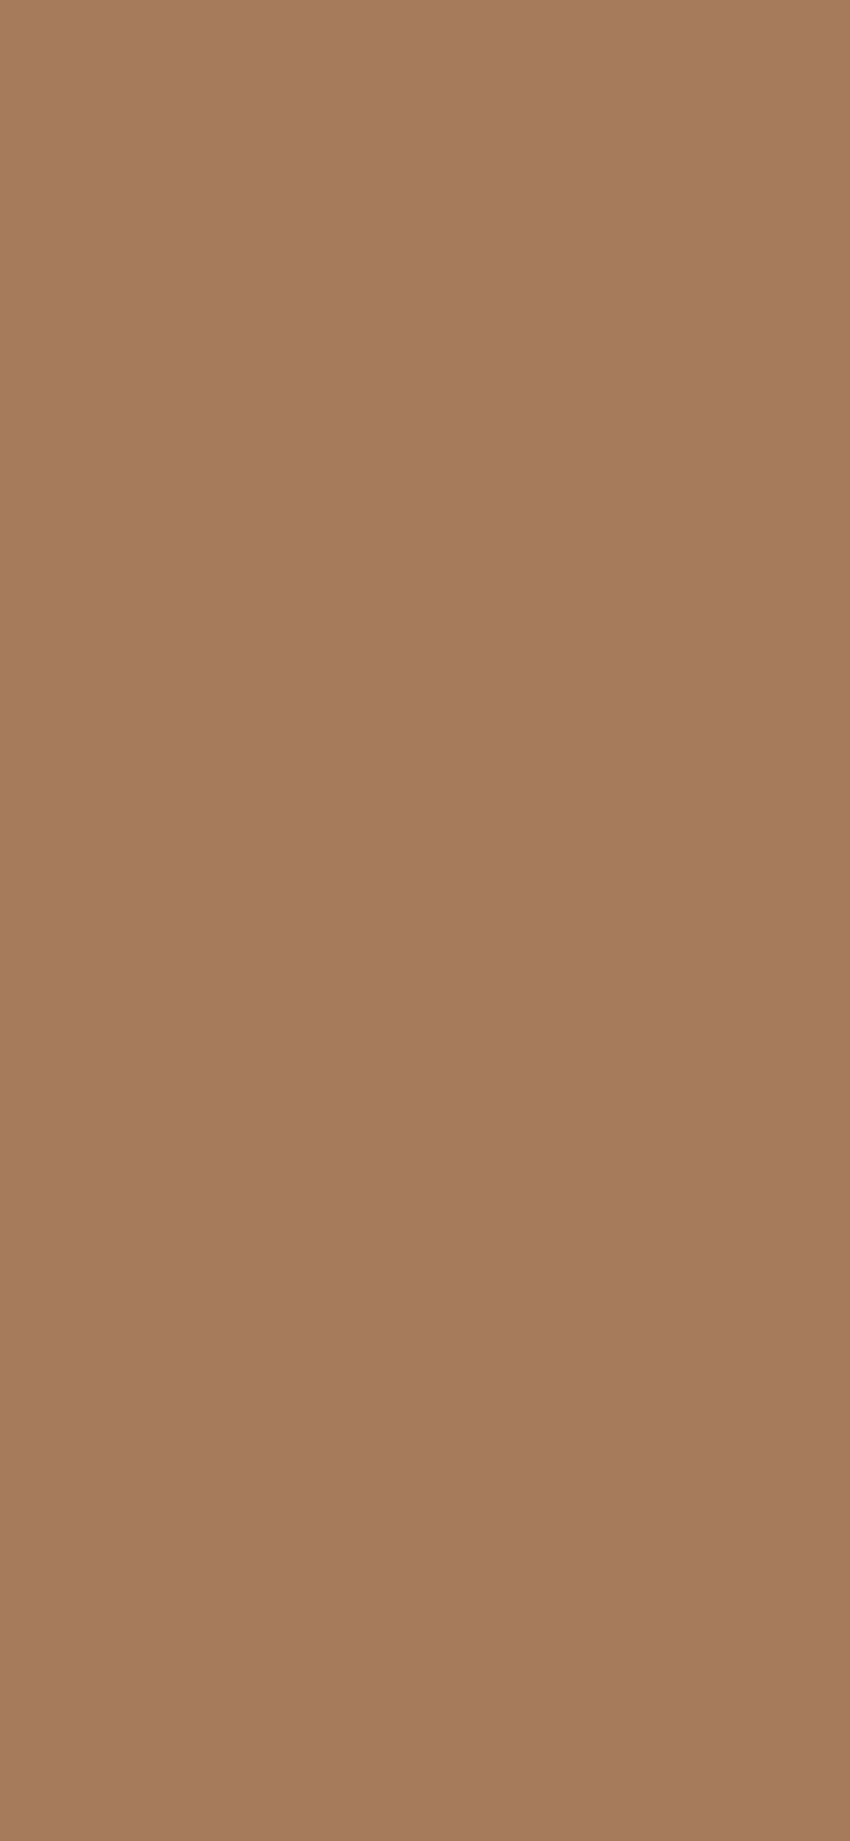 Beige Color Iphone posted by John Anderson, neutral colors HD phone wallpaper